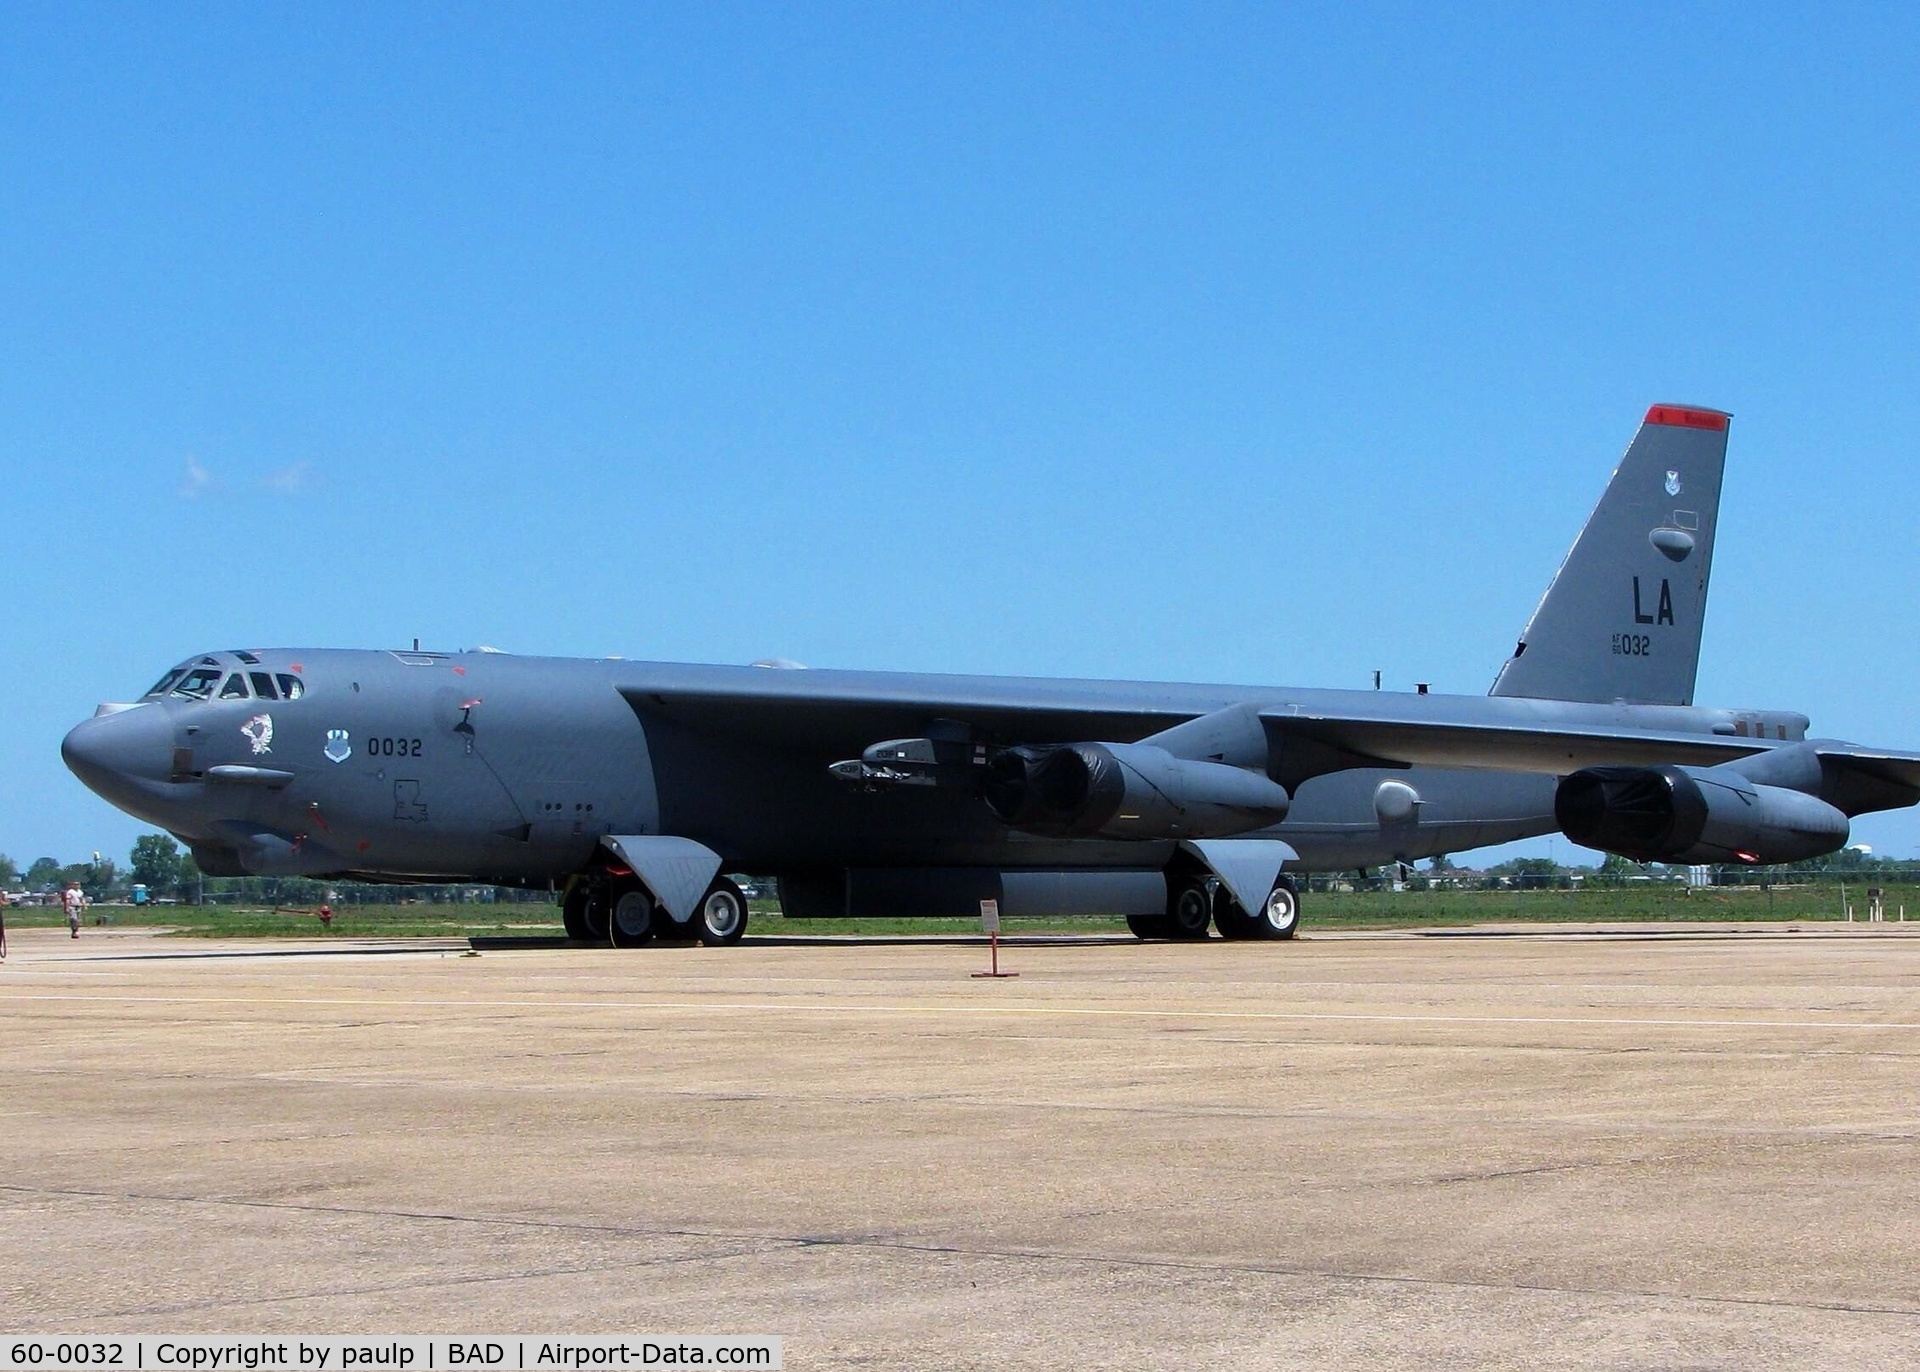 60-0032, 1960 Boeing B-52H Stratofortress C/N 464397, At Barksdale Air Force Base.